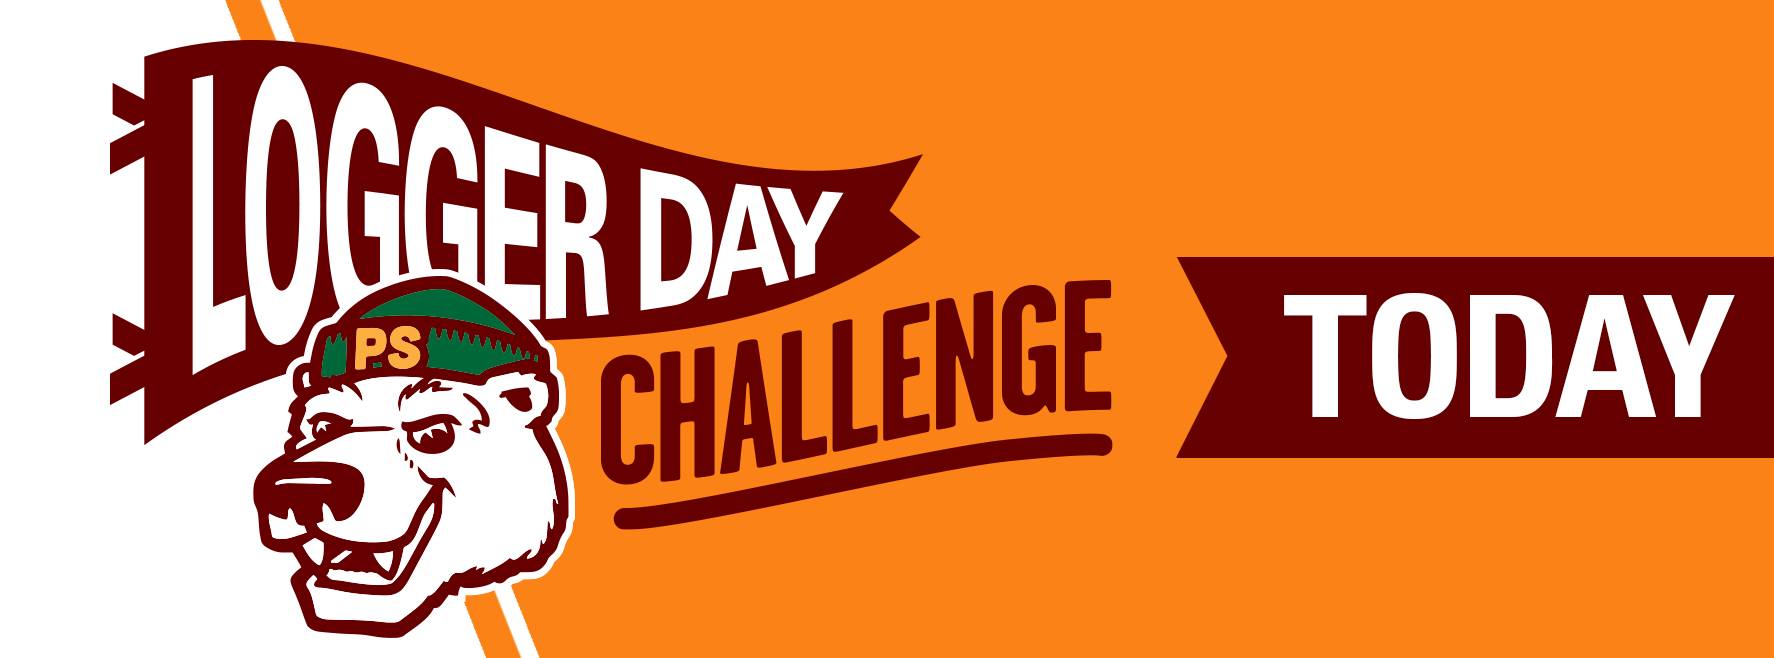 Logger Day Challenge TODAY